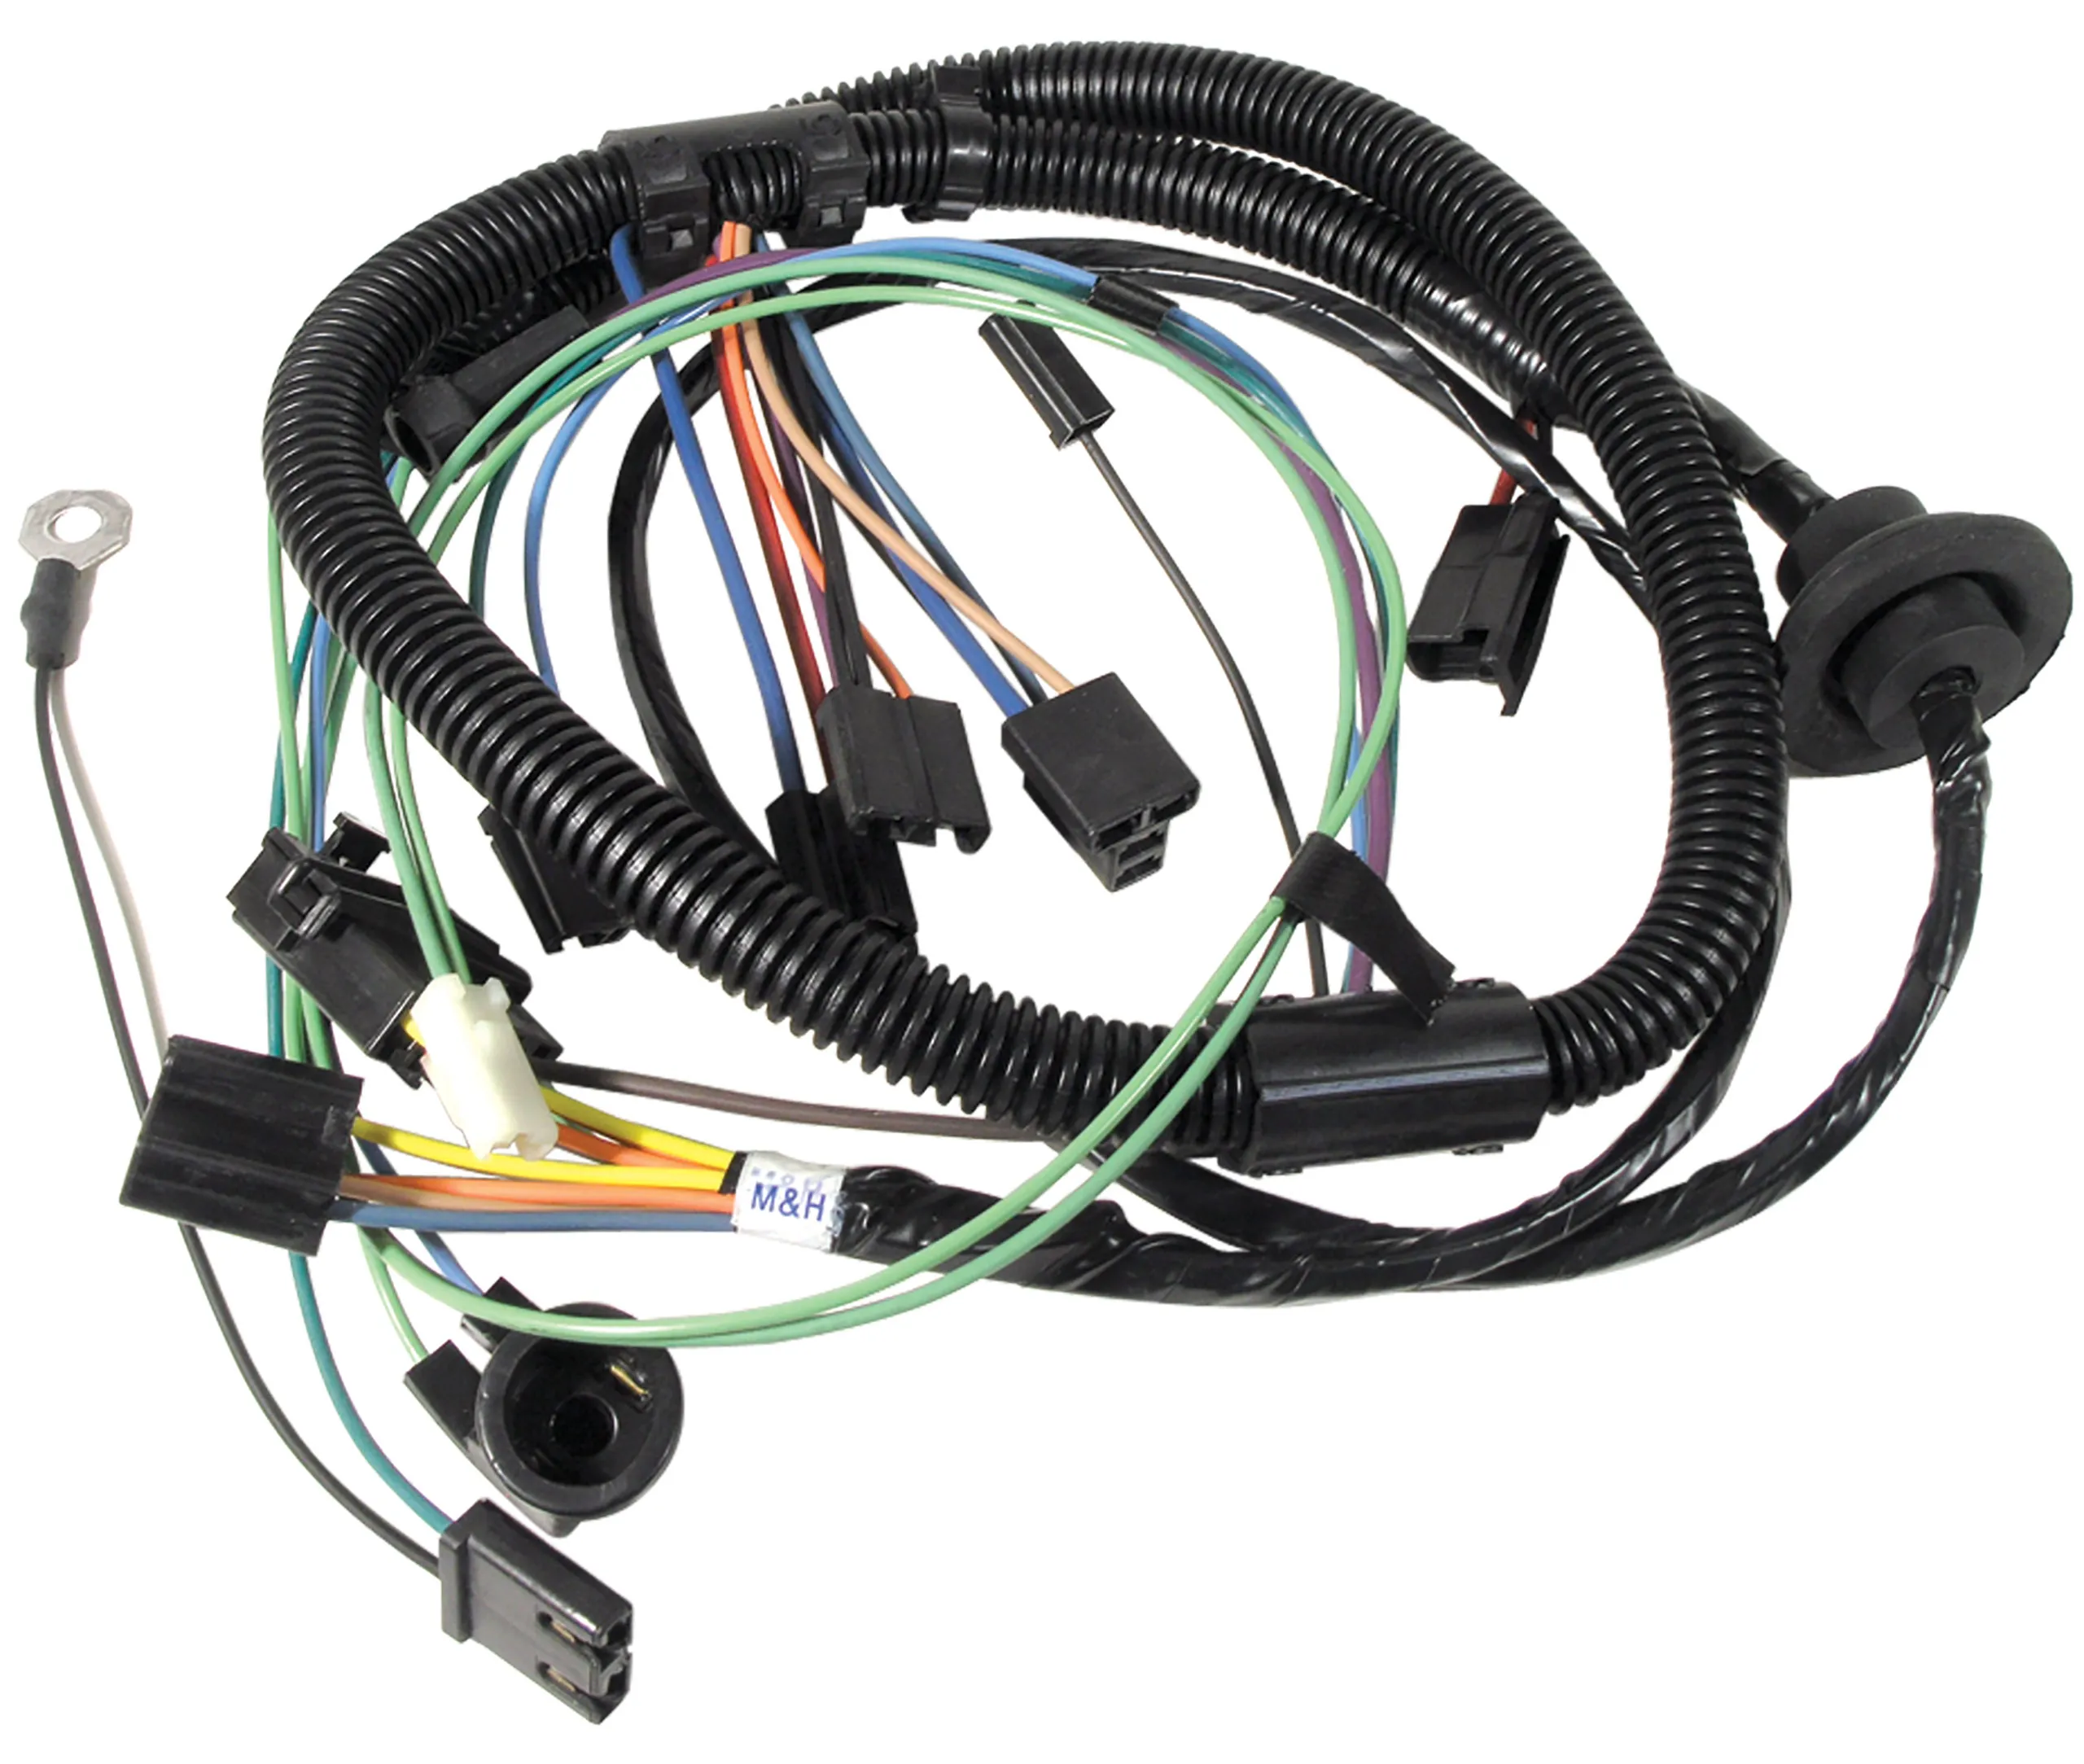 C3 1977 Chevrolet Corvette Harness. Air Conditioning W/Heater Wiring Late - Lectric Limited, Inc.